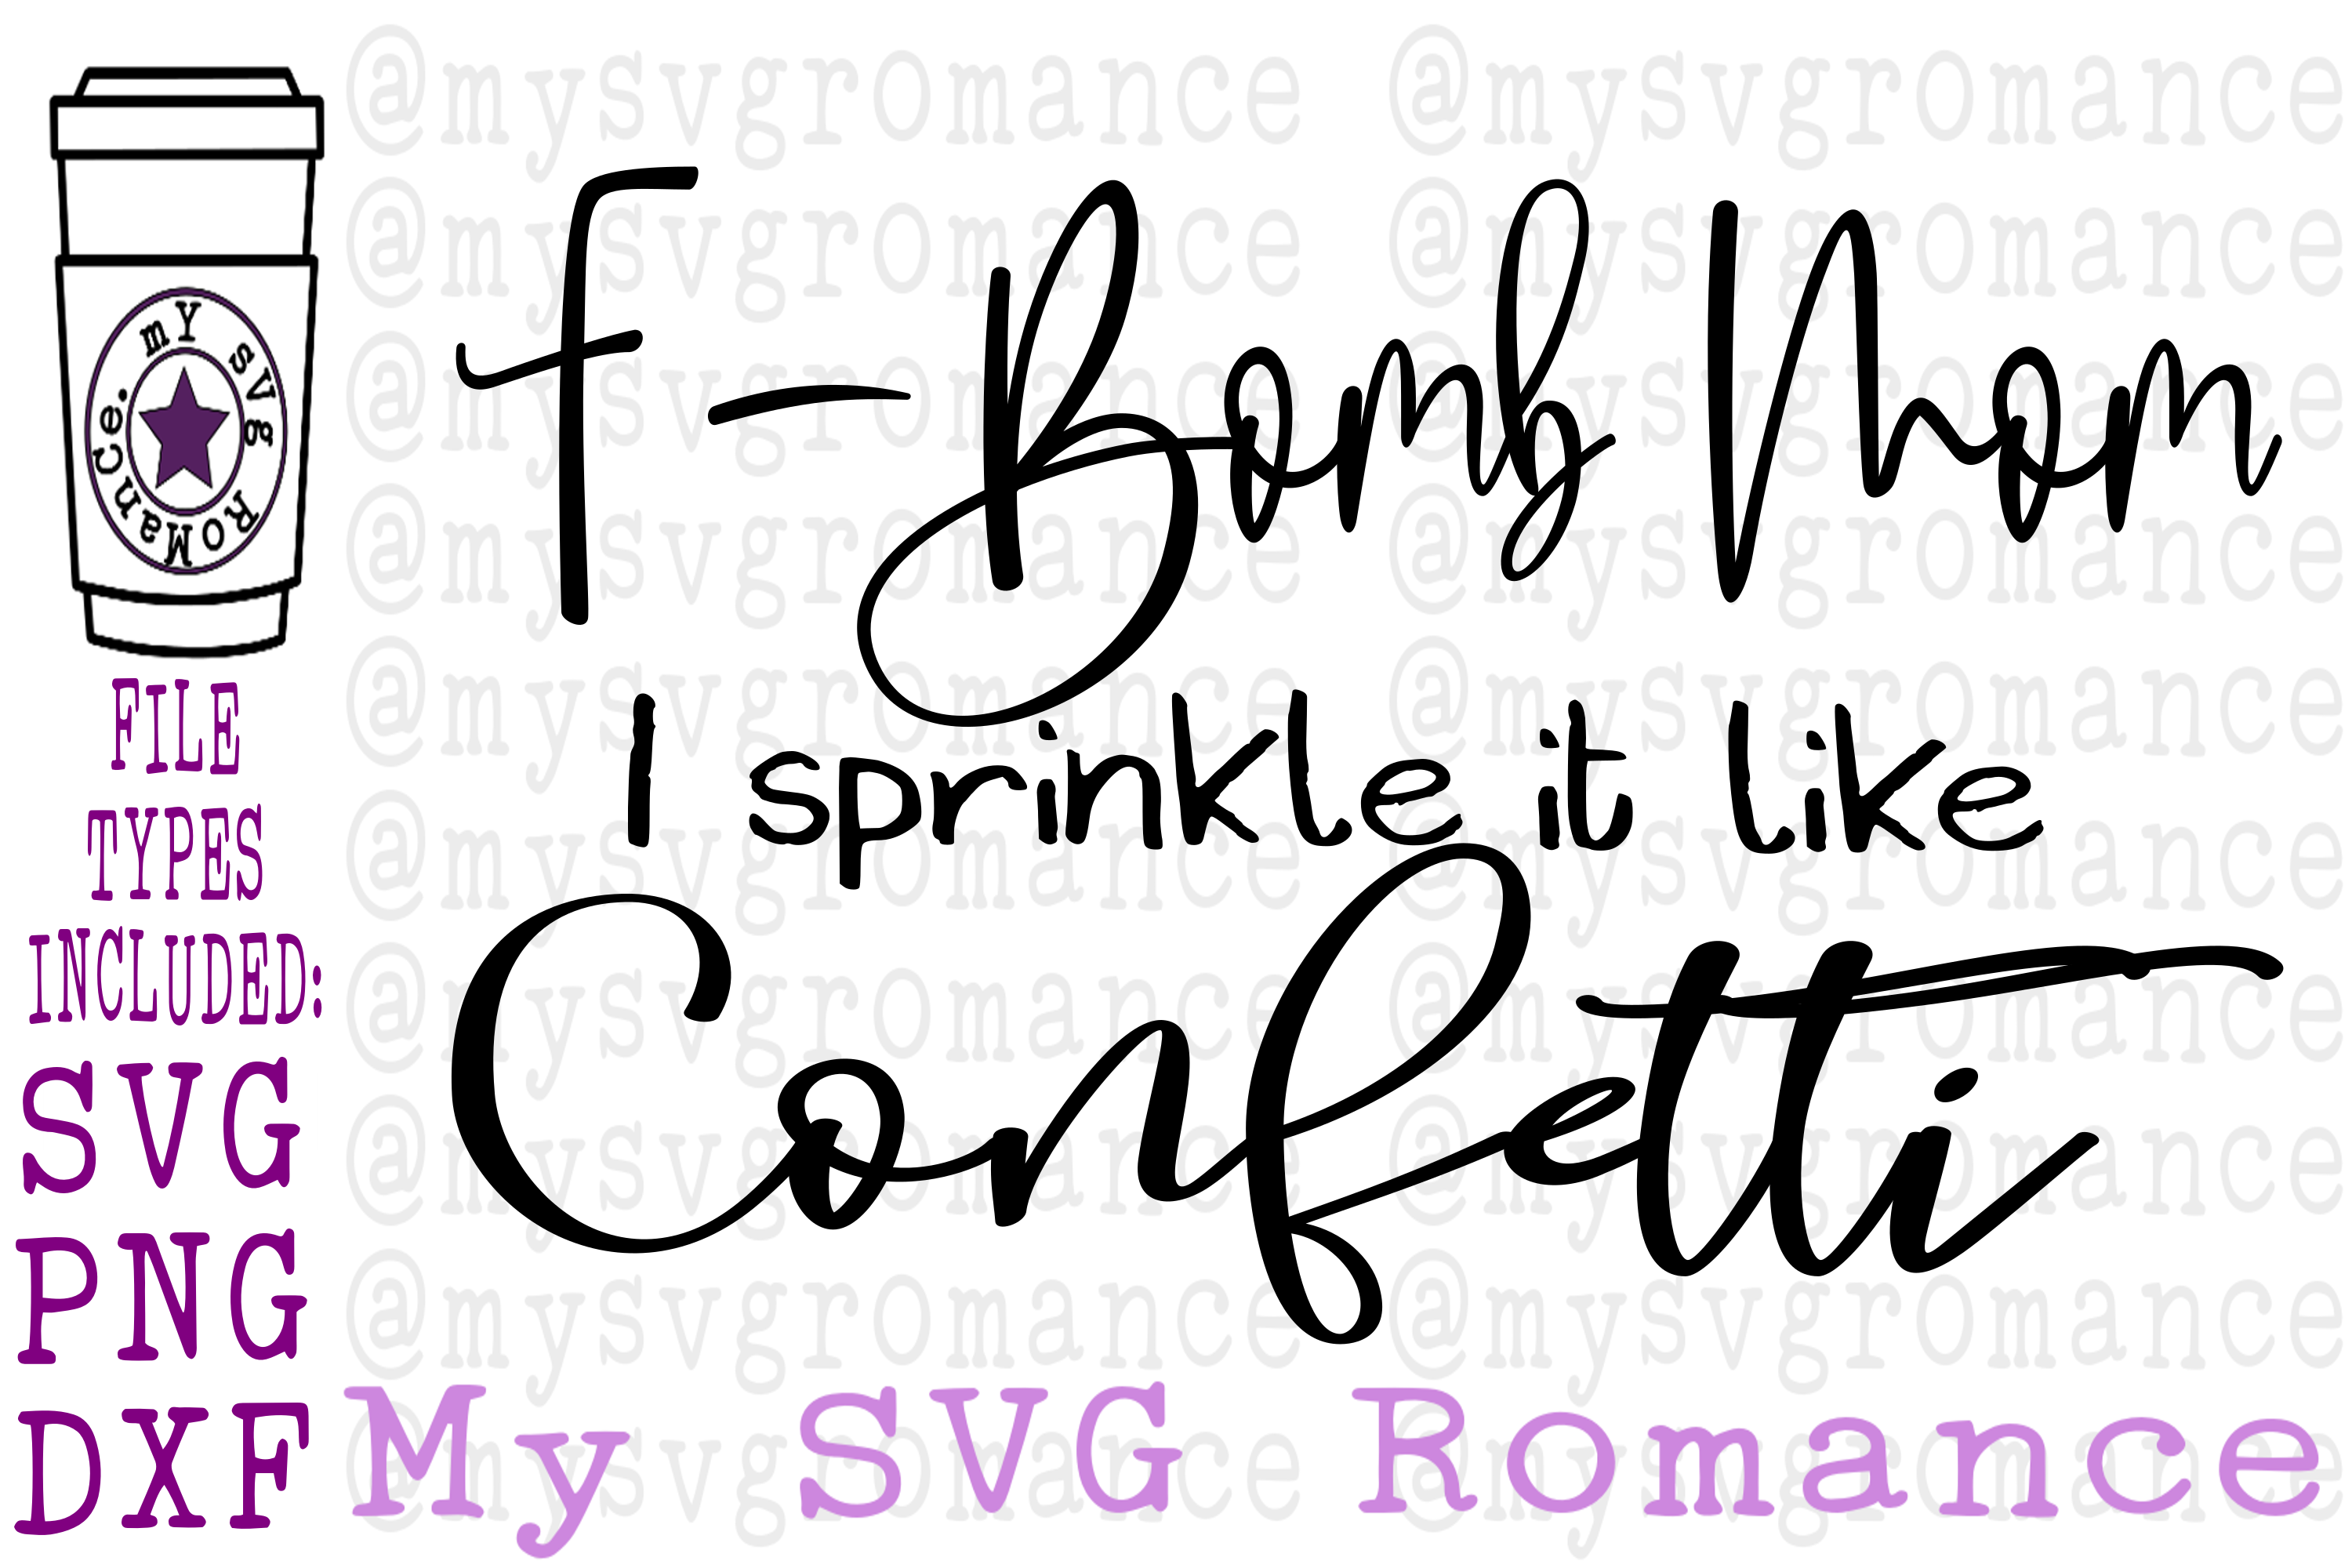 Free Free 117 F Bomb Mom I Sprinkle F-Bombs Like Confetti Svg Free SVG PNG EPS DXF File